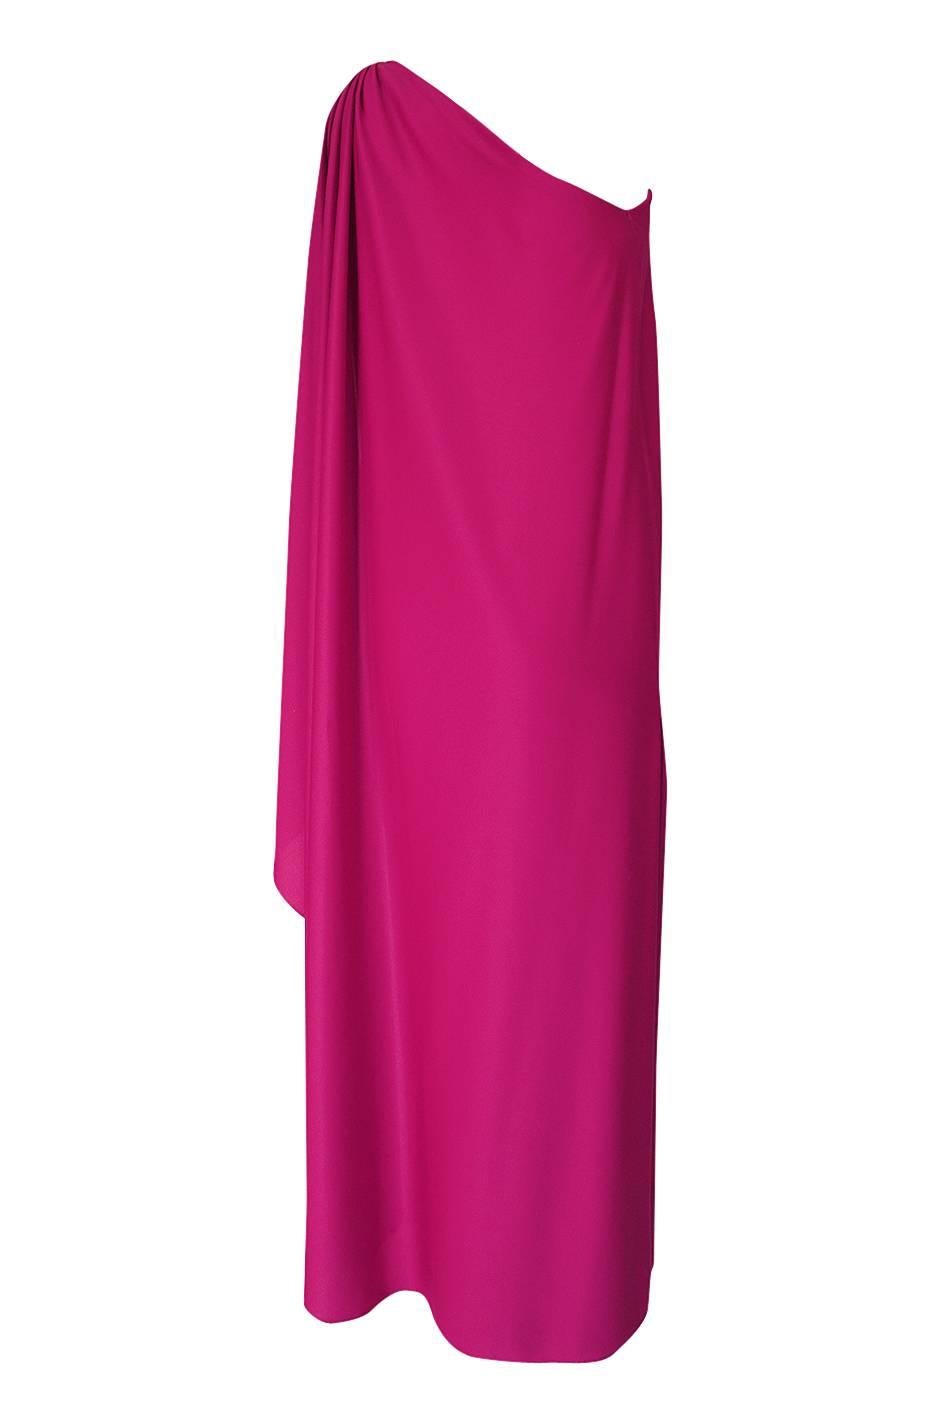 

I am always on the look out for this style of dress by Halston. It is perhaps the most iconic of all of the Halston silhouettes and in 2016 a red version of this exact dress entered modern day fashion history when Kate Moss wore its twin on the